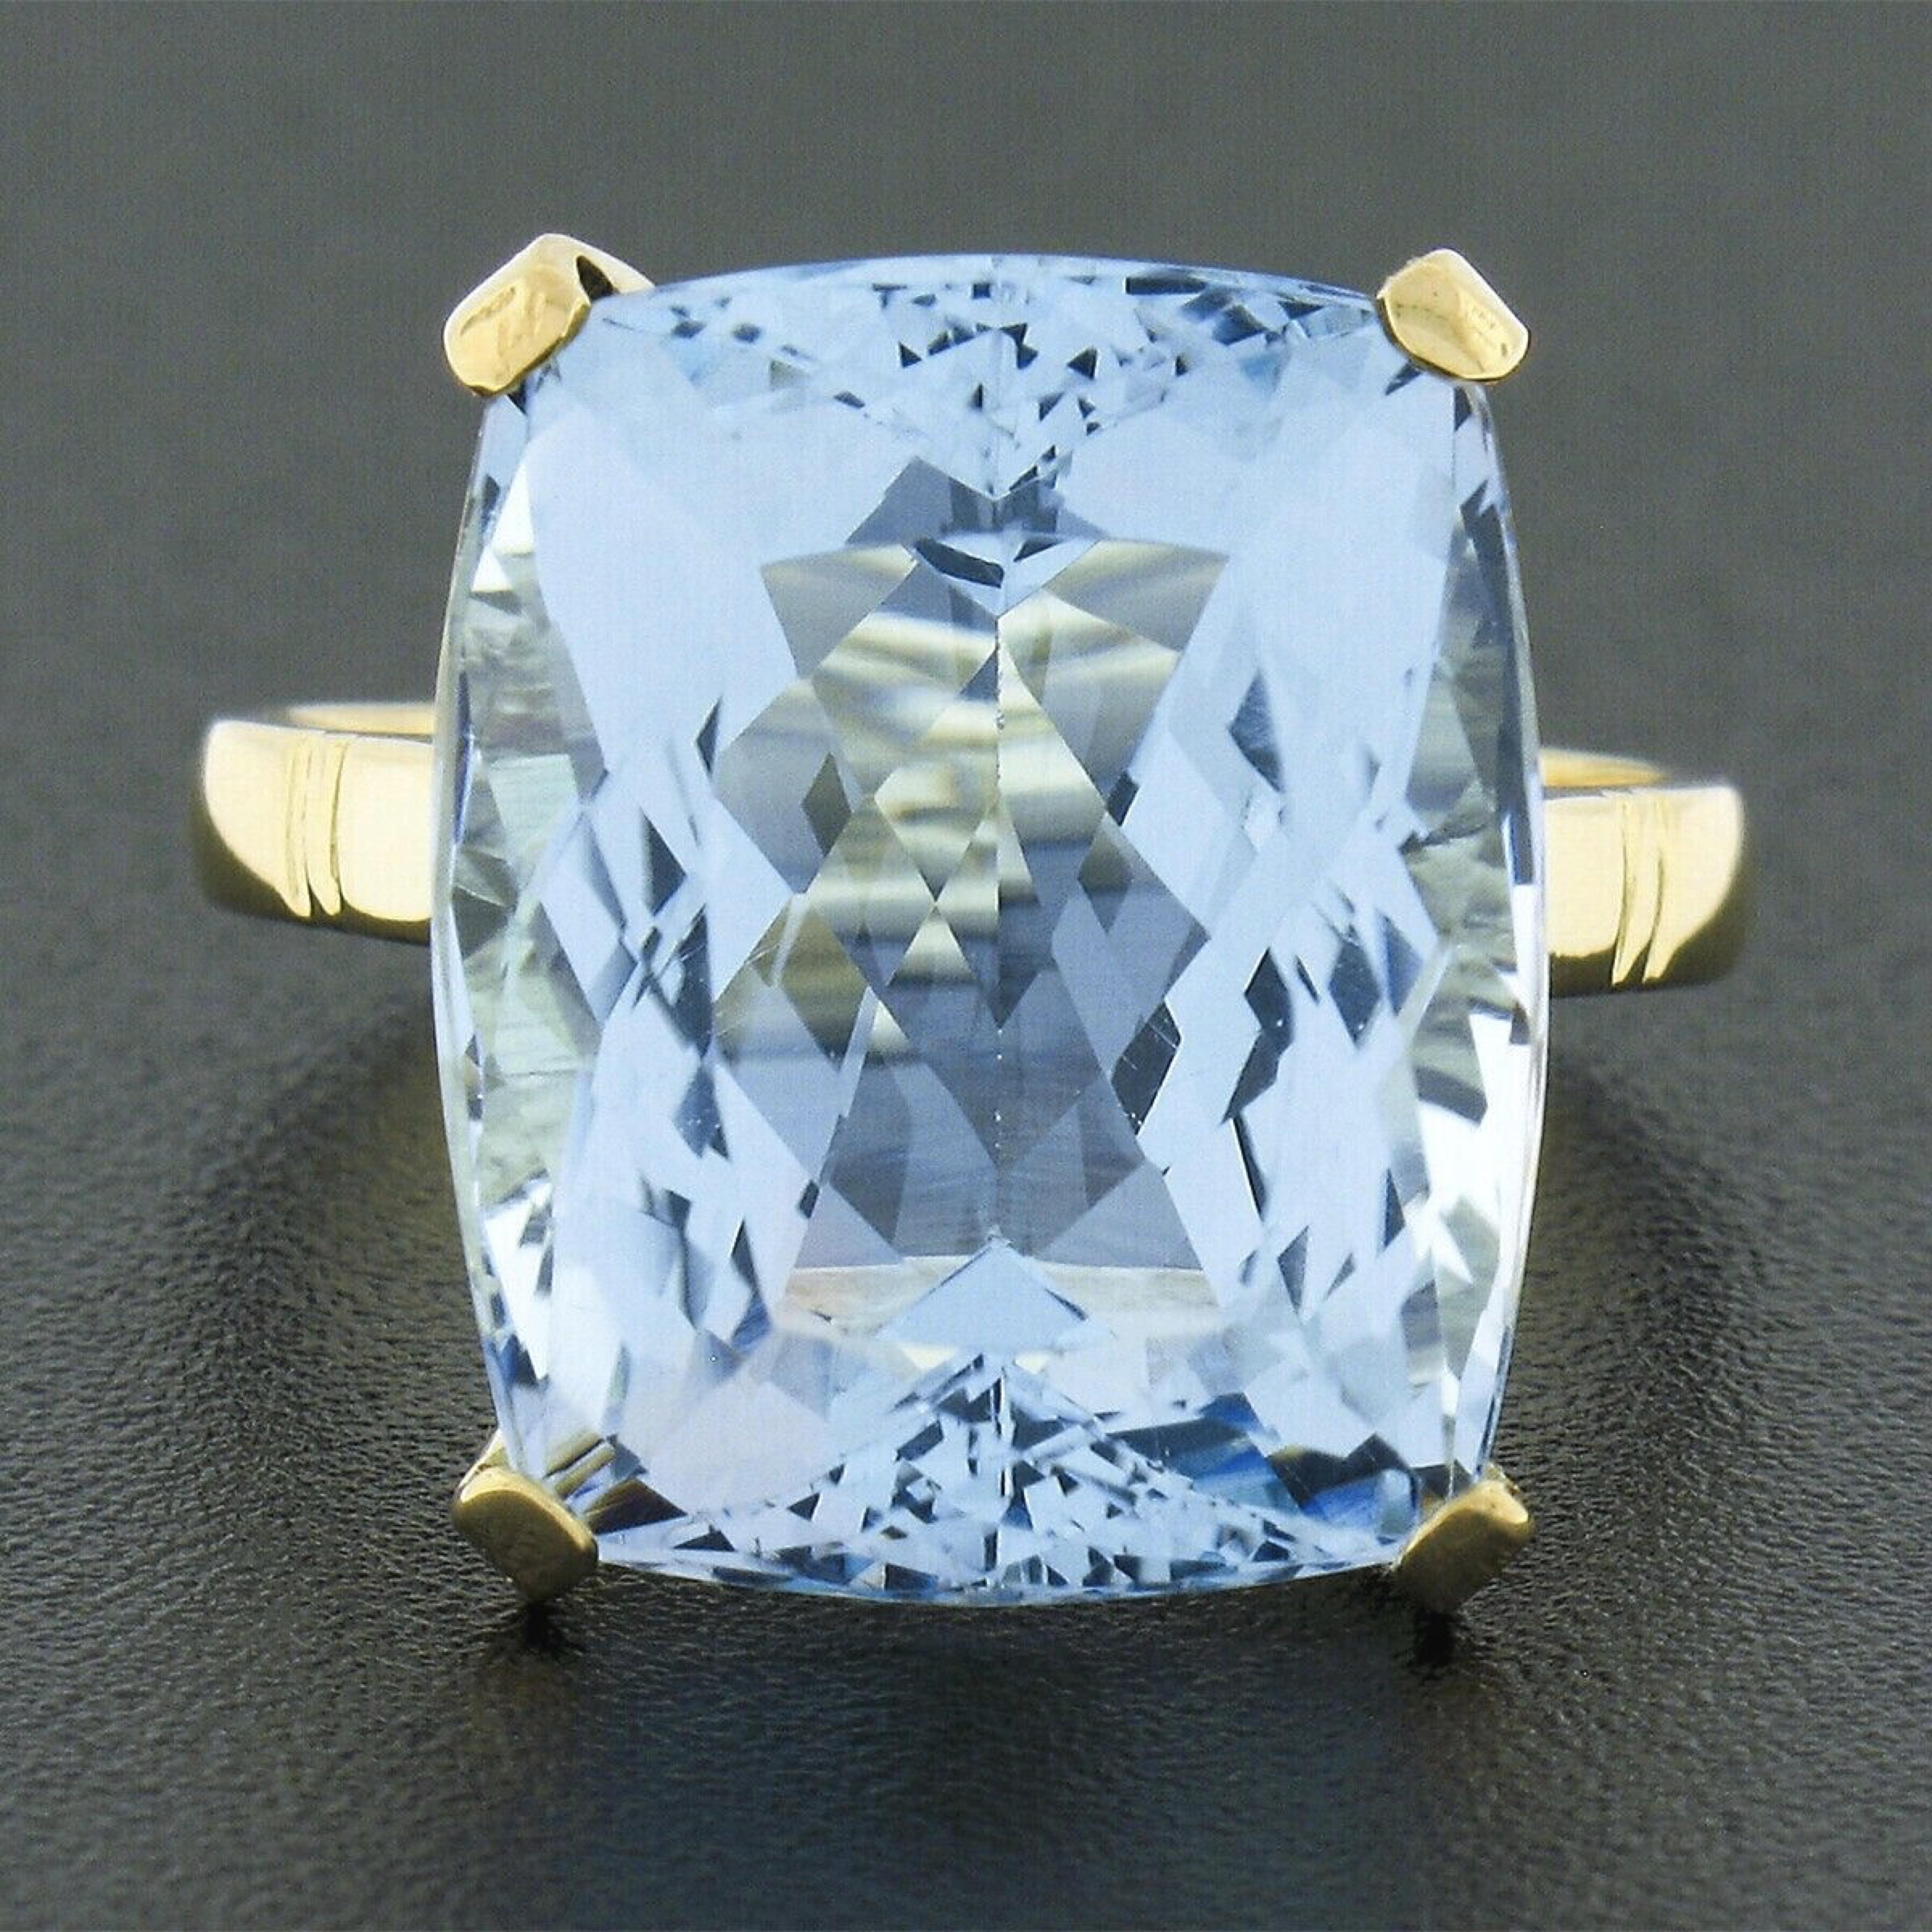 Up for sale we have an absolutely stunning, GIA certified, aquamarine solitaire cocktail ring. The fine quality aquamarine is a large rectangular cushion cut stone, weighing approximately 11.50 carats, with the most outstanding and soothing medium